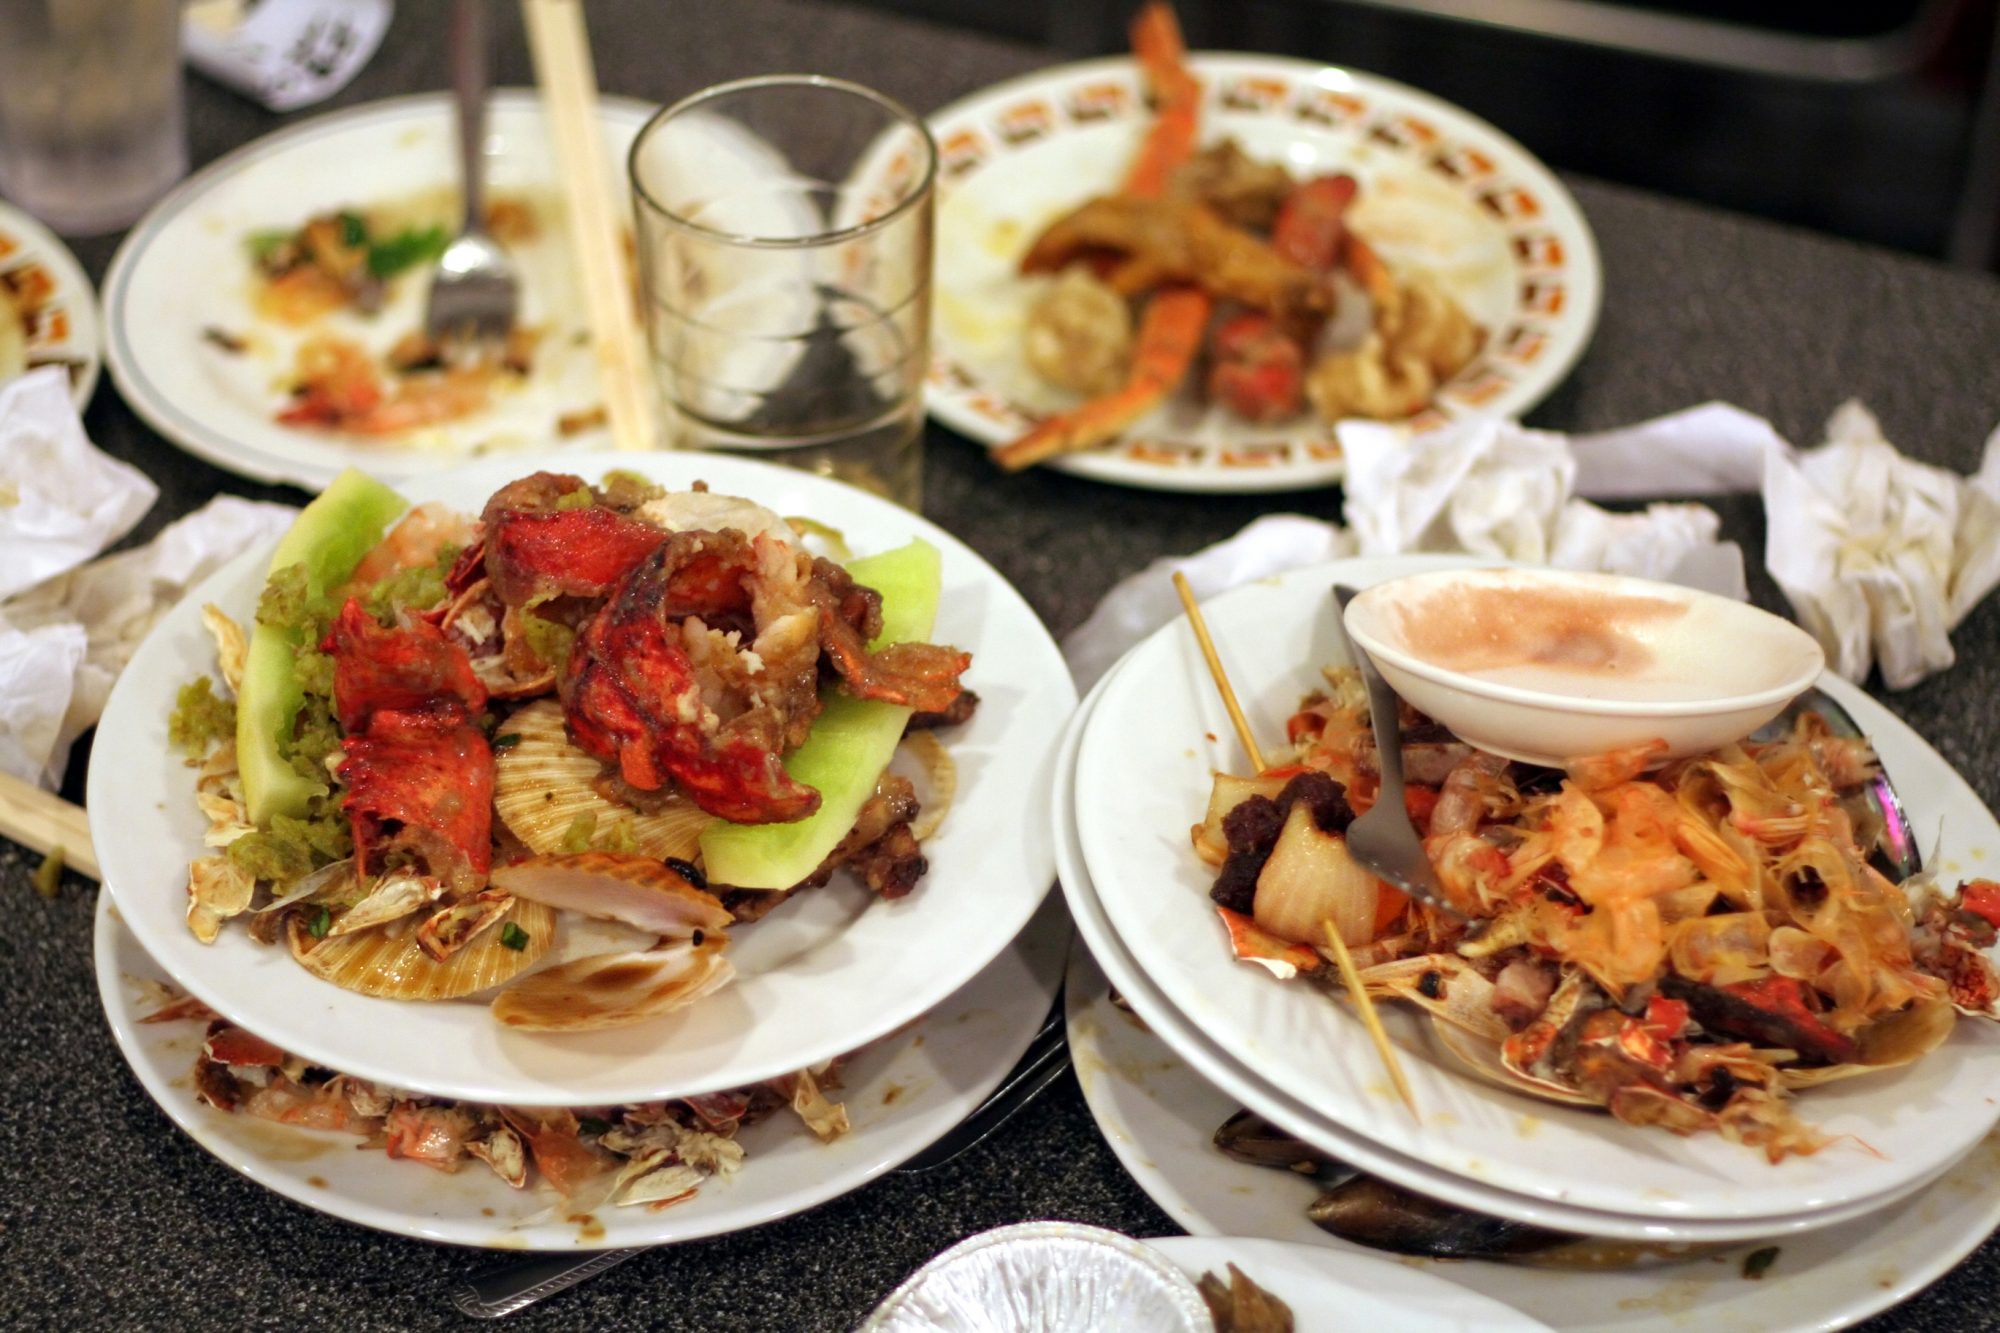 Food waste in restaurants is a growing problem in the food industry